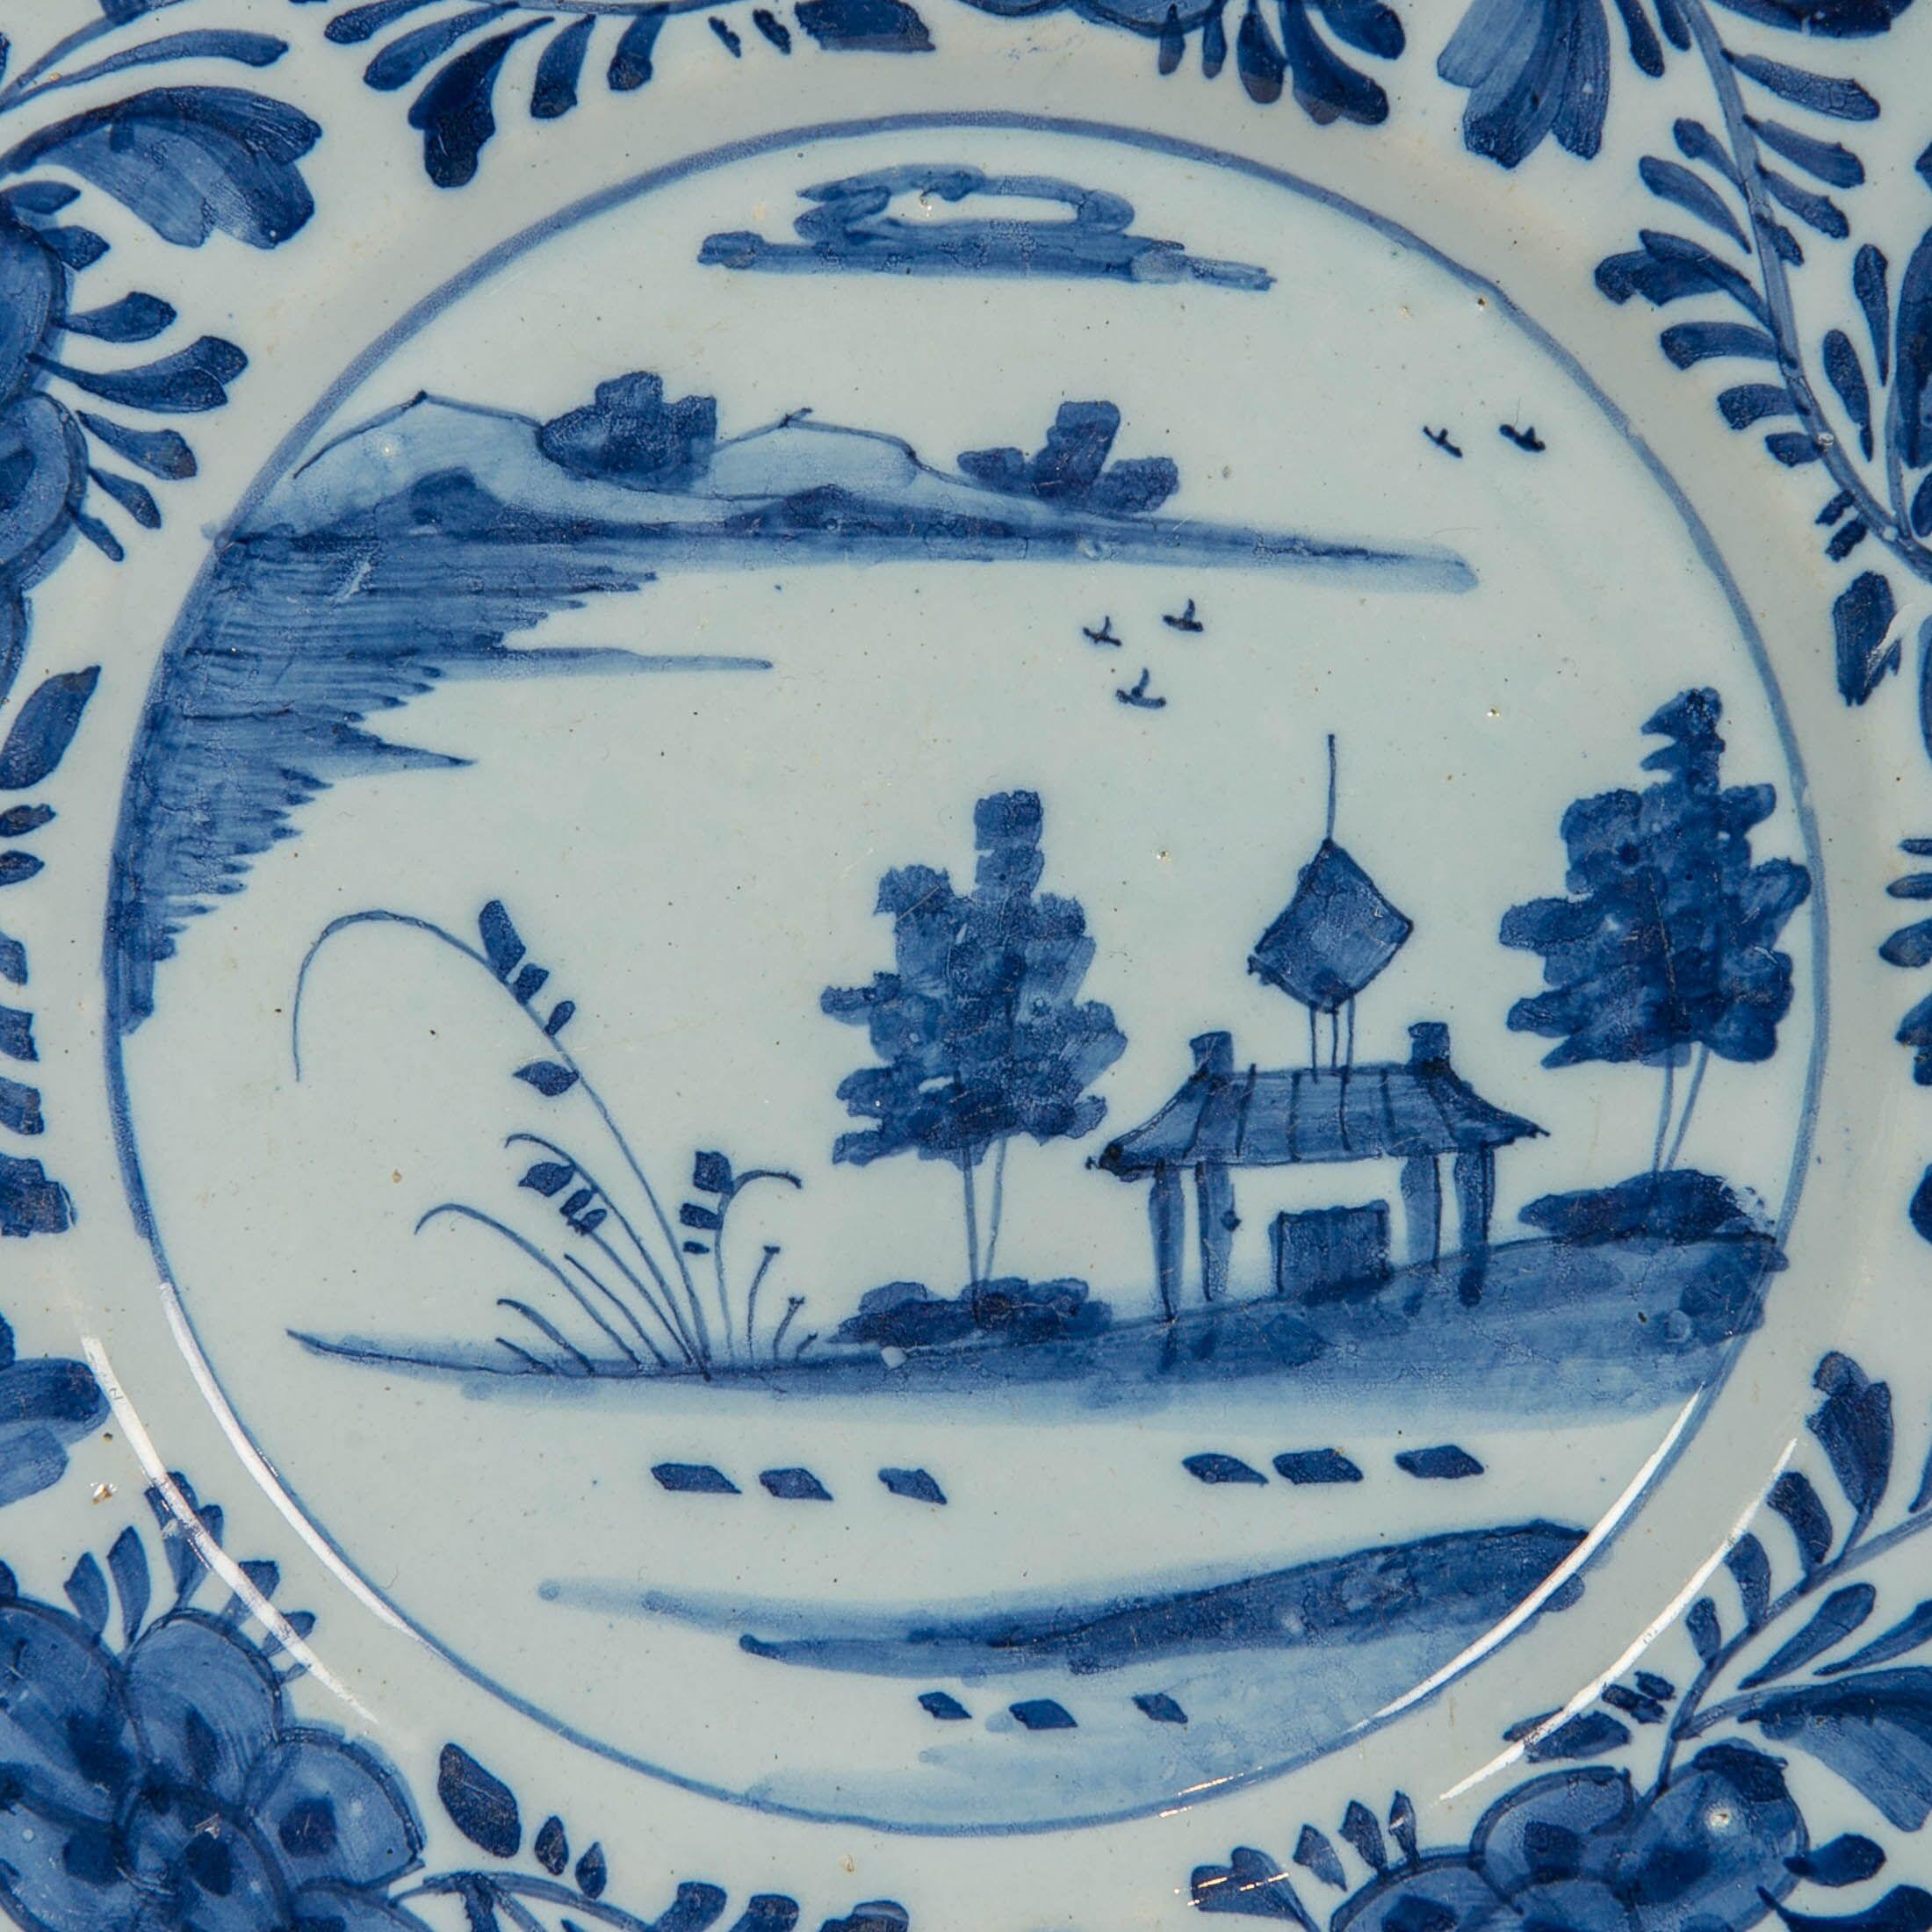 A Dutch Delft blue and white dish showing a waterside scene.
What makes this dish so lovely is the naively hand-painted scene showing a pair of stylized trees flanking a small house by the waterside.
Completing the decoration, the border is painted